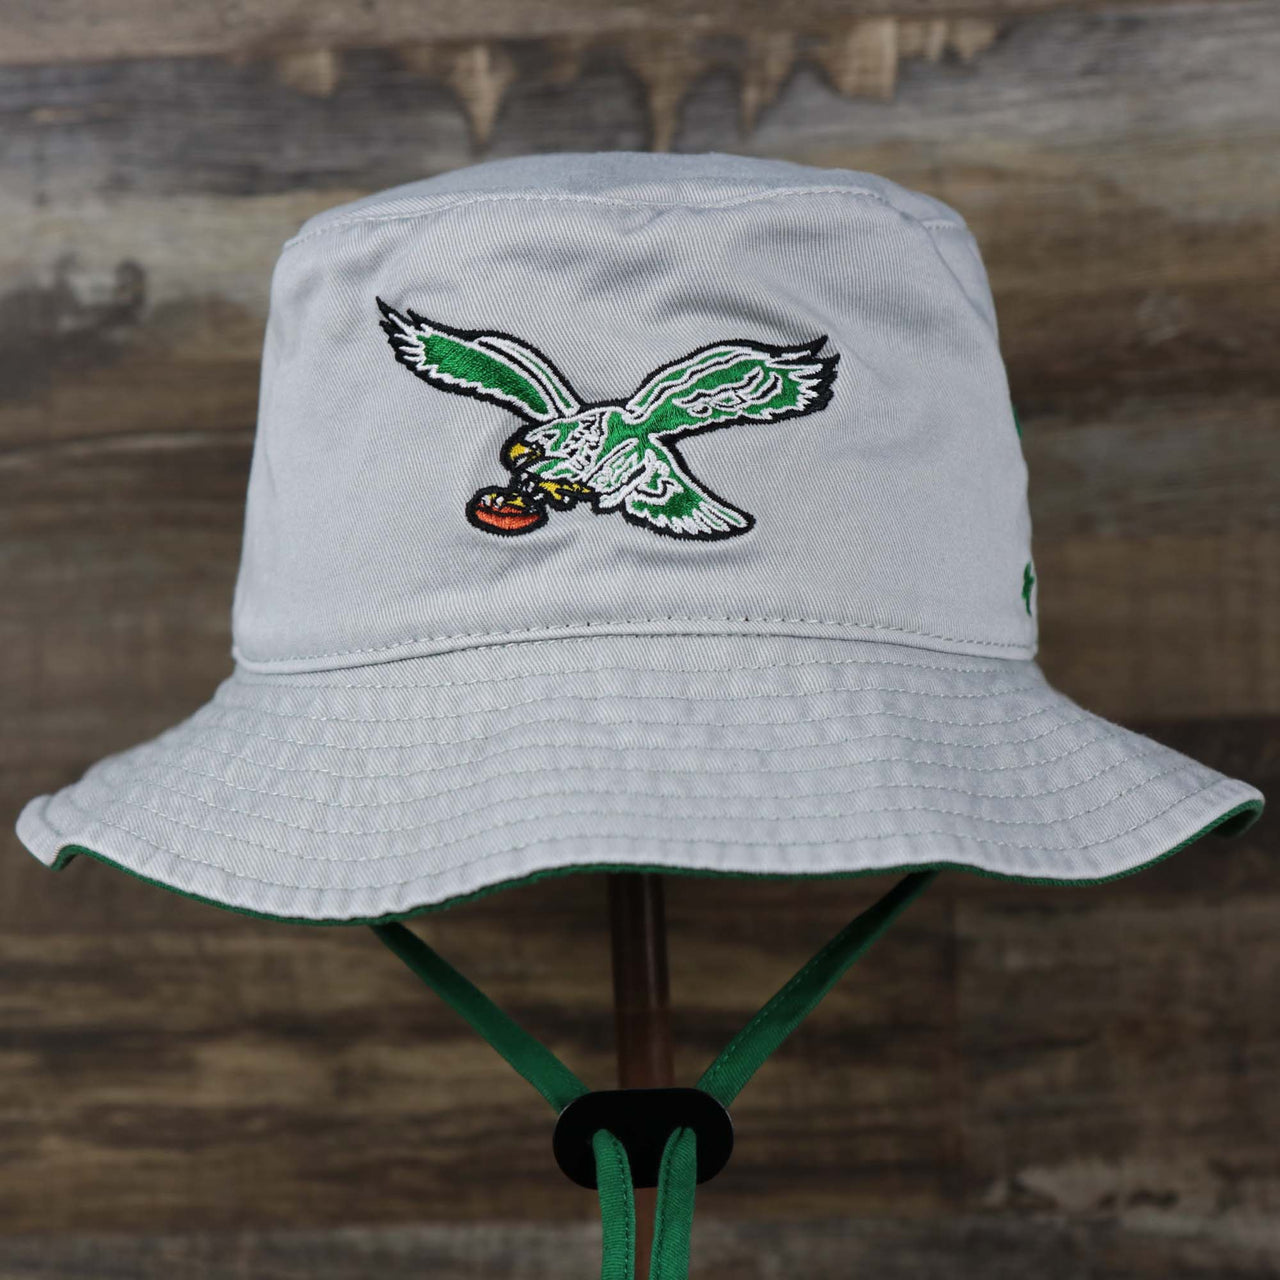 The front of the Throwback Philadelphia Eagles Vintage Bucket Hat | 47 Brand, Gray